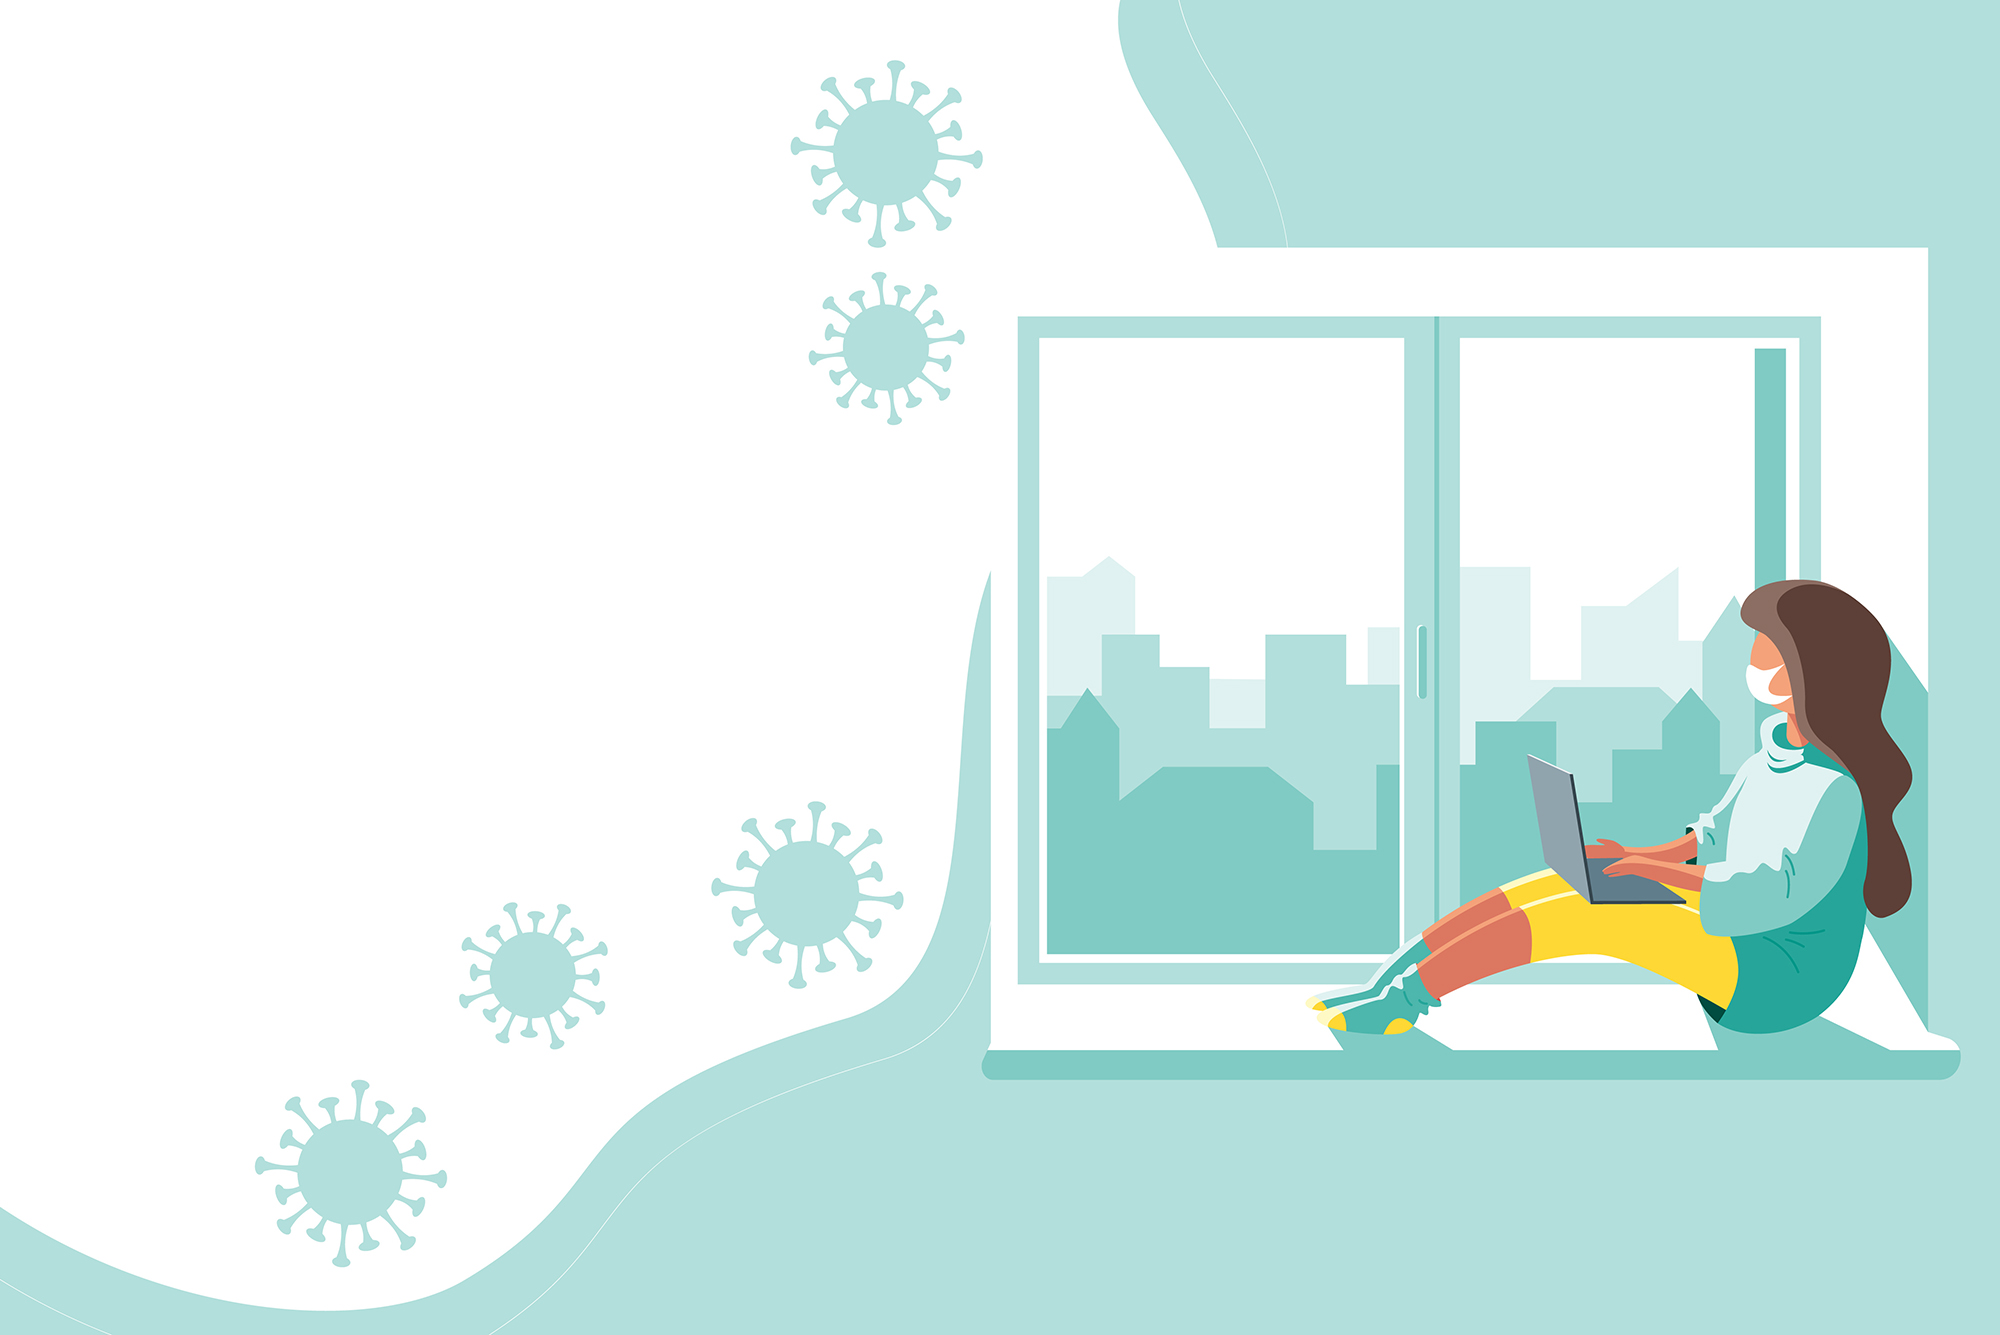 Vector illustration of a younger girl with brown hair in a protective medical mask with a computer at home in quarantine. She looks out at a light blue city landscape while negative space to the left show a few coronavirus illustrations.